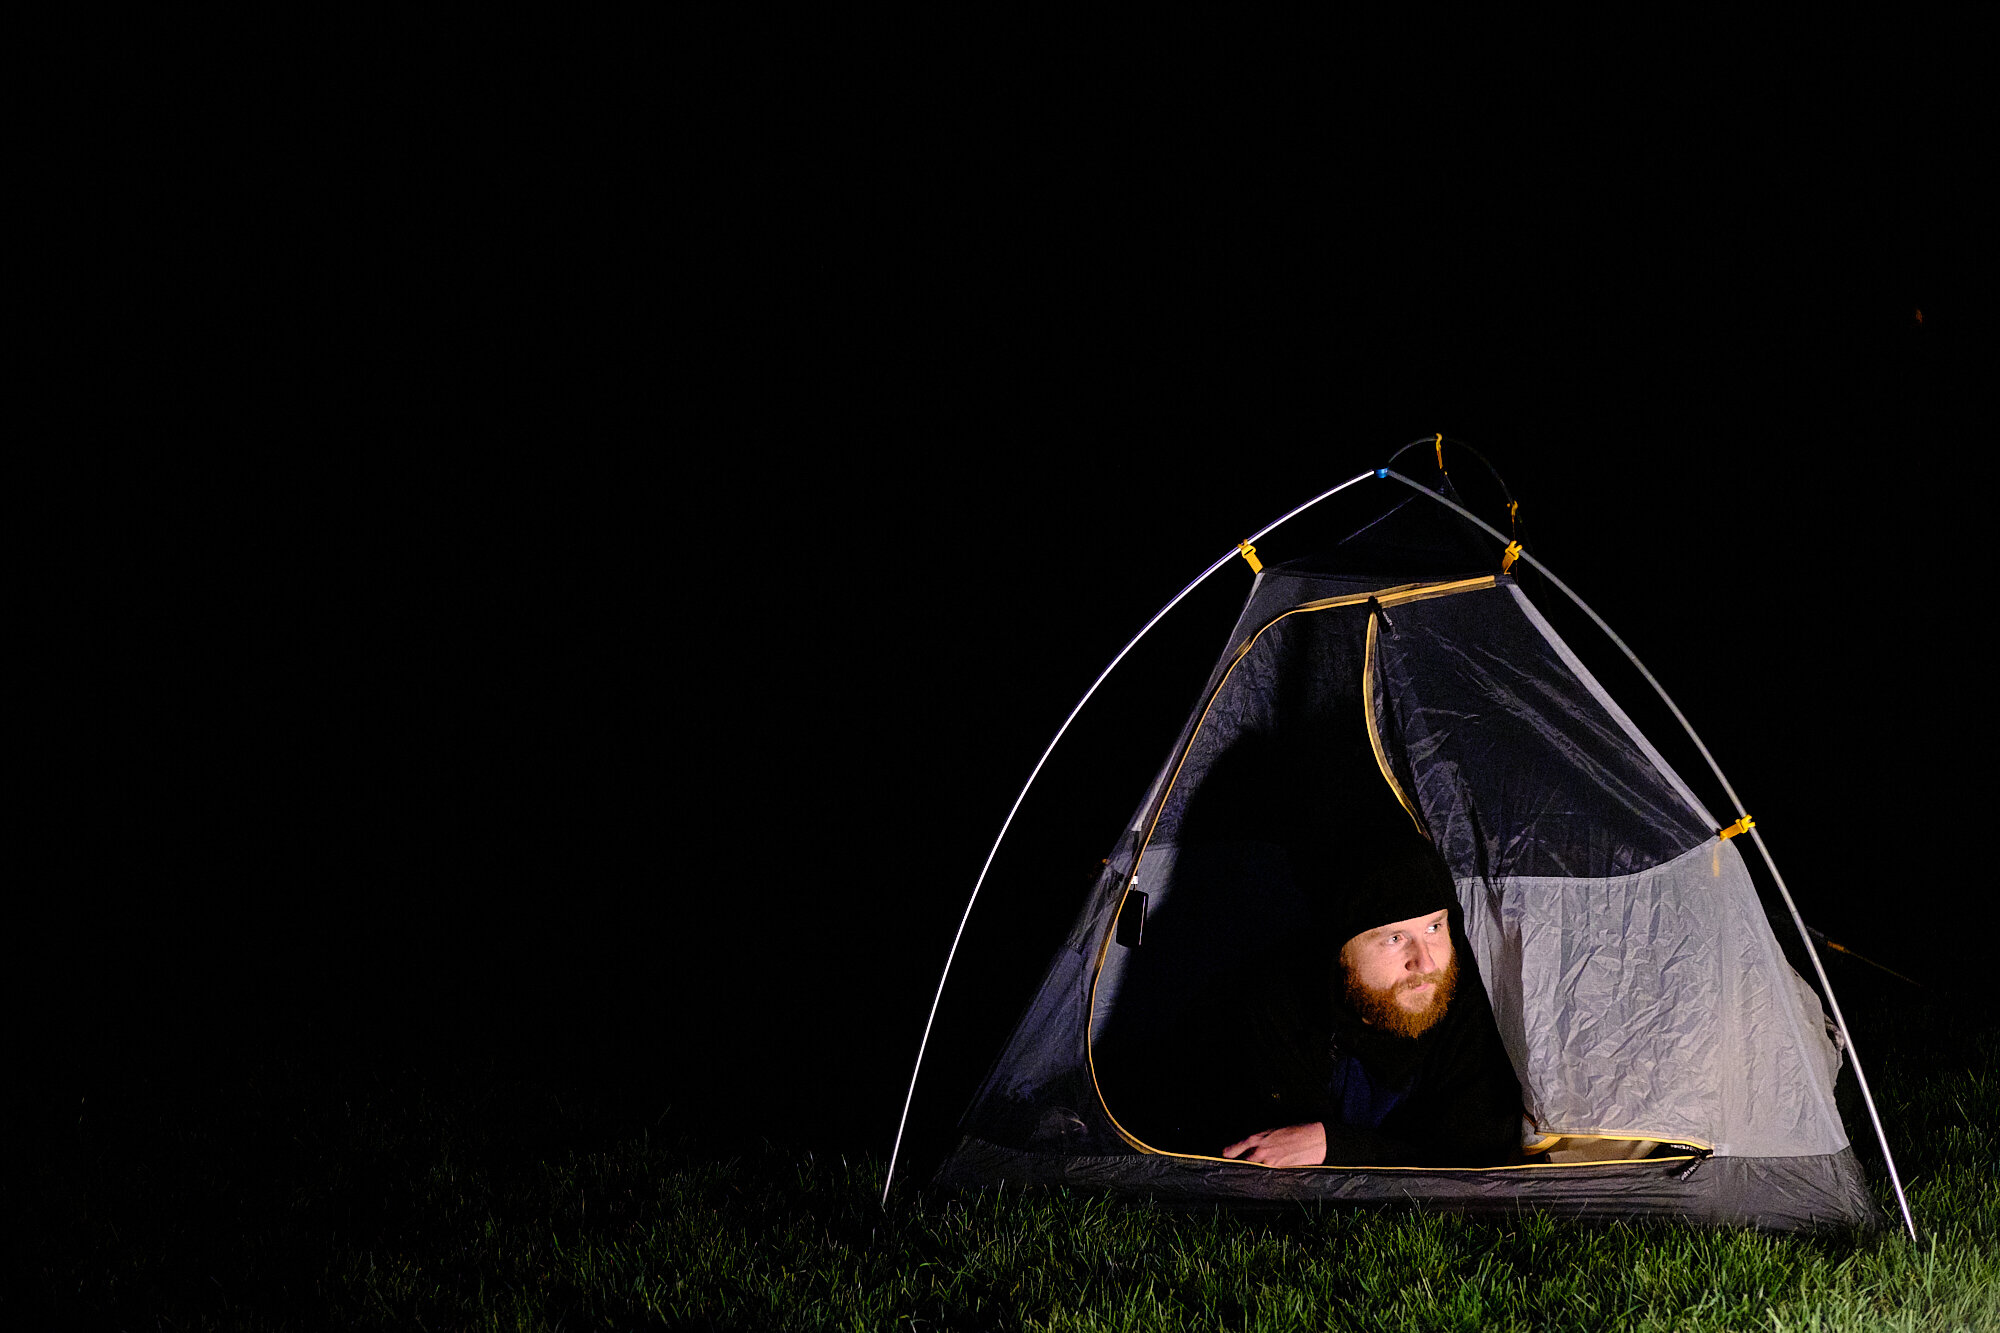  For a change of pace we decided to camp out in the yard on a warm night. | 5/3/20 Ann Arbor, MI 